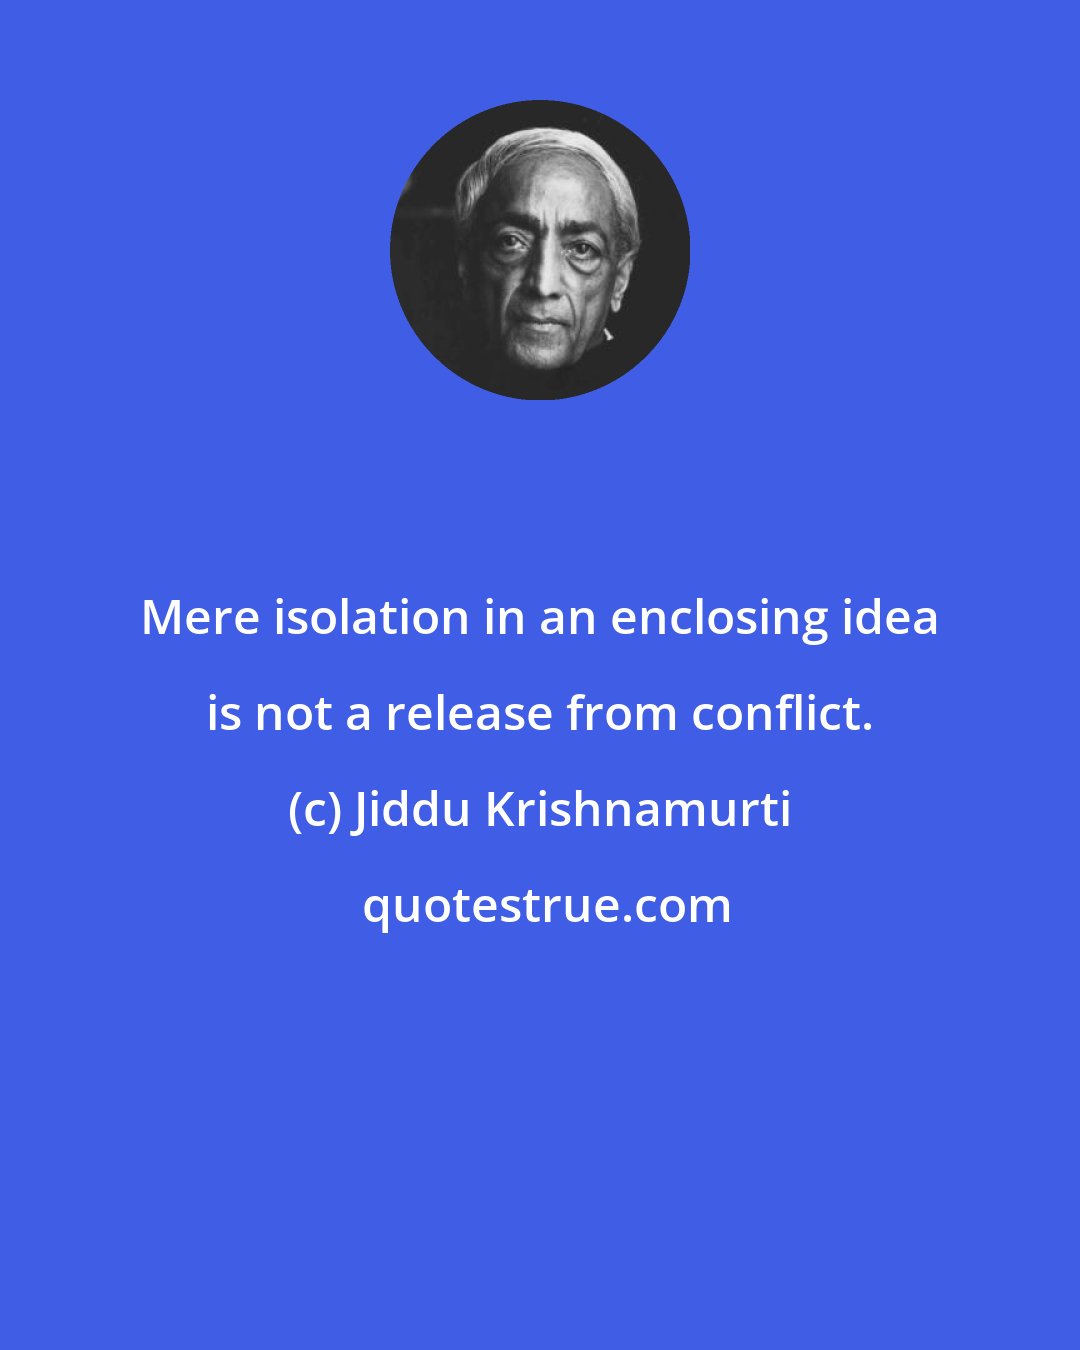 Jiddu Krishnamurti: Mere isolation in an enclosing idea is not a release from conflict.